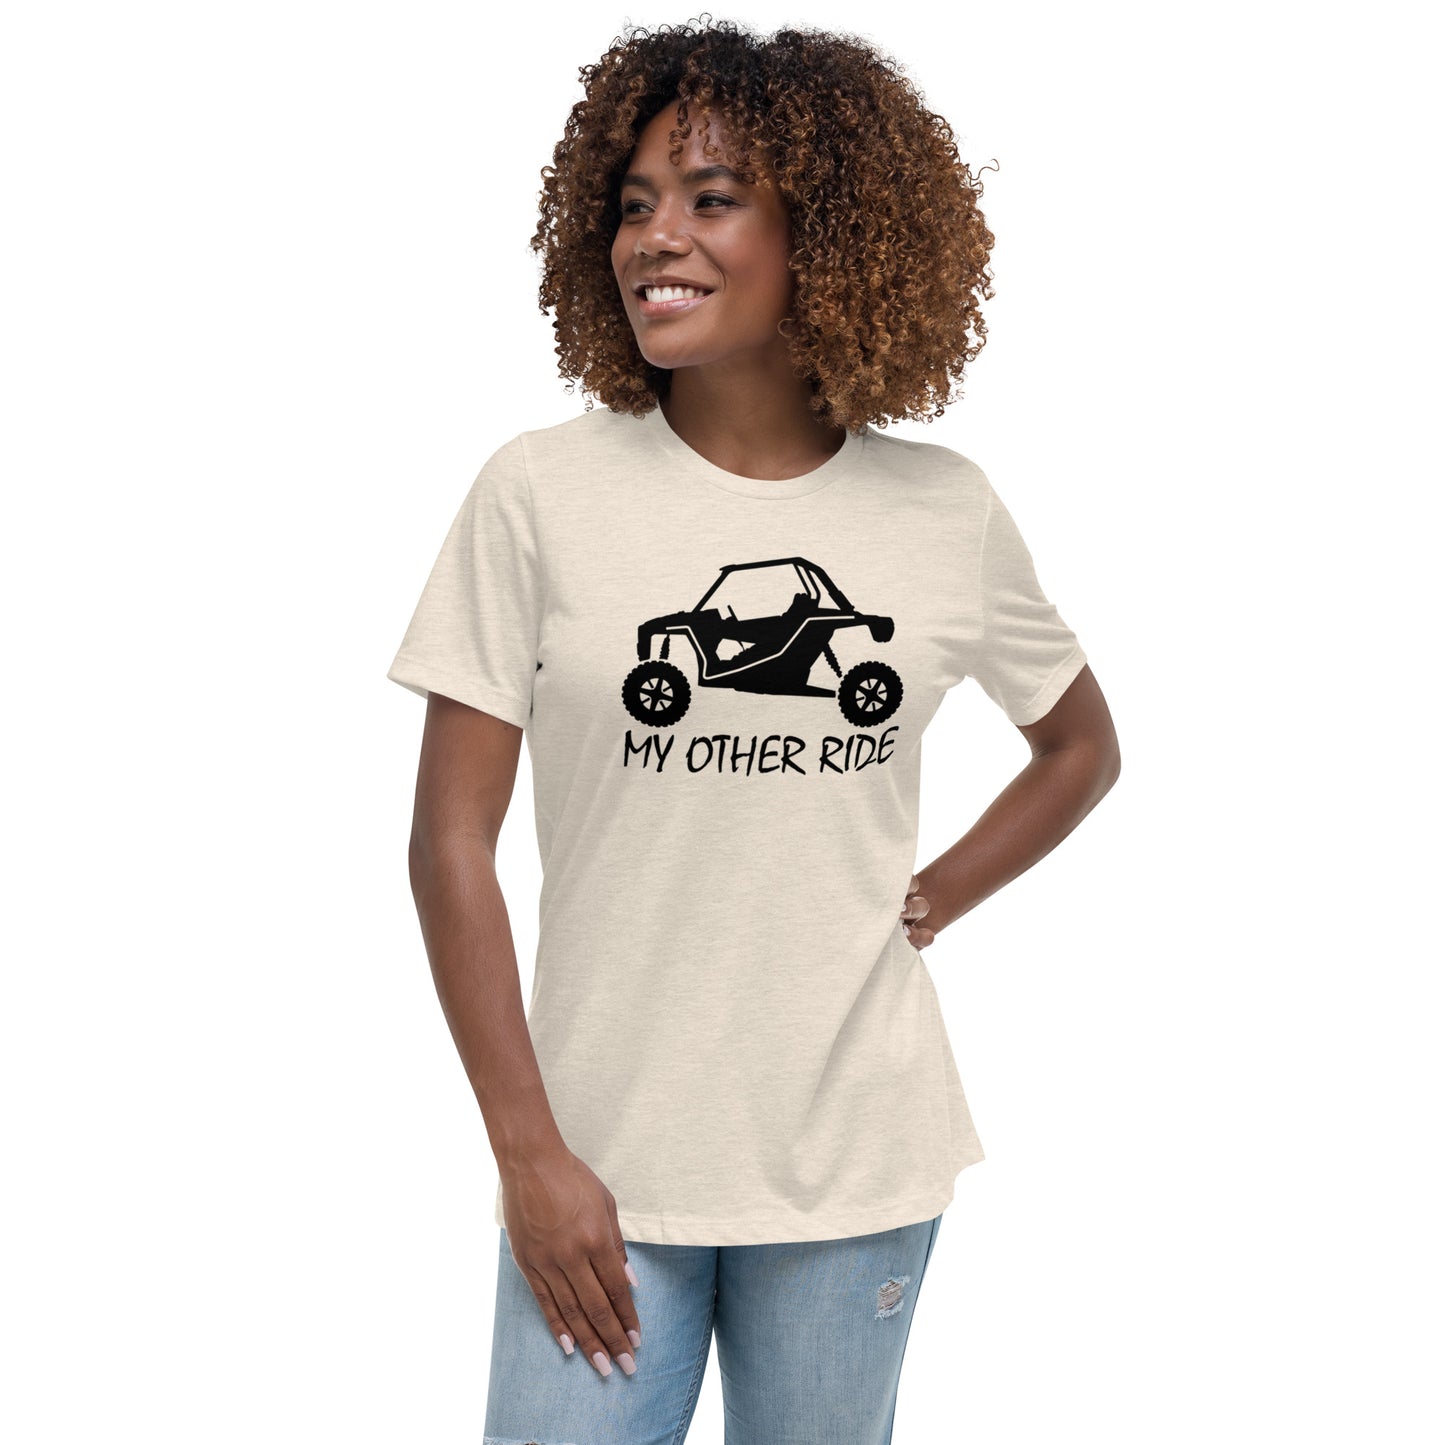 My Other Ride Women's Relaxed T-Shirt